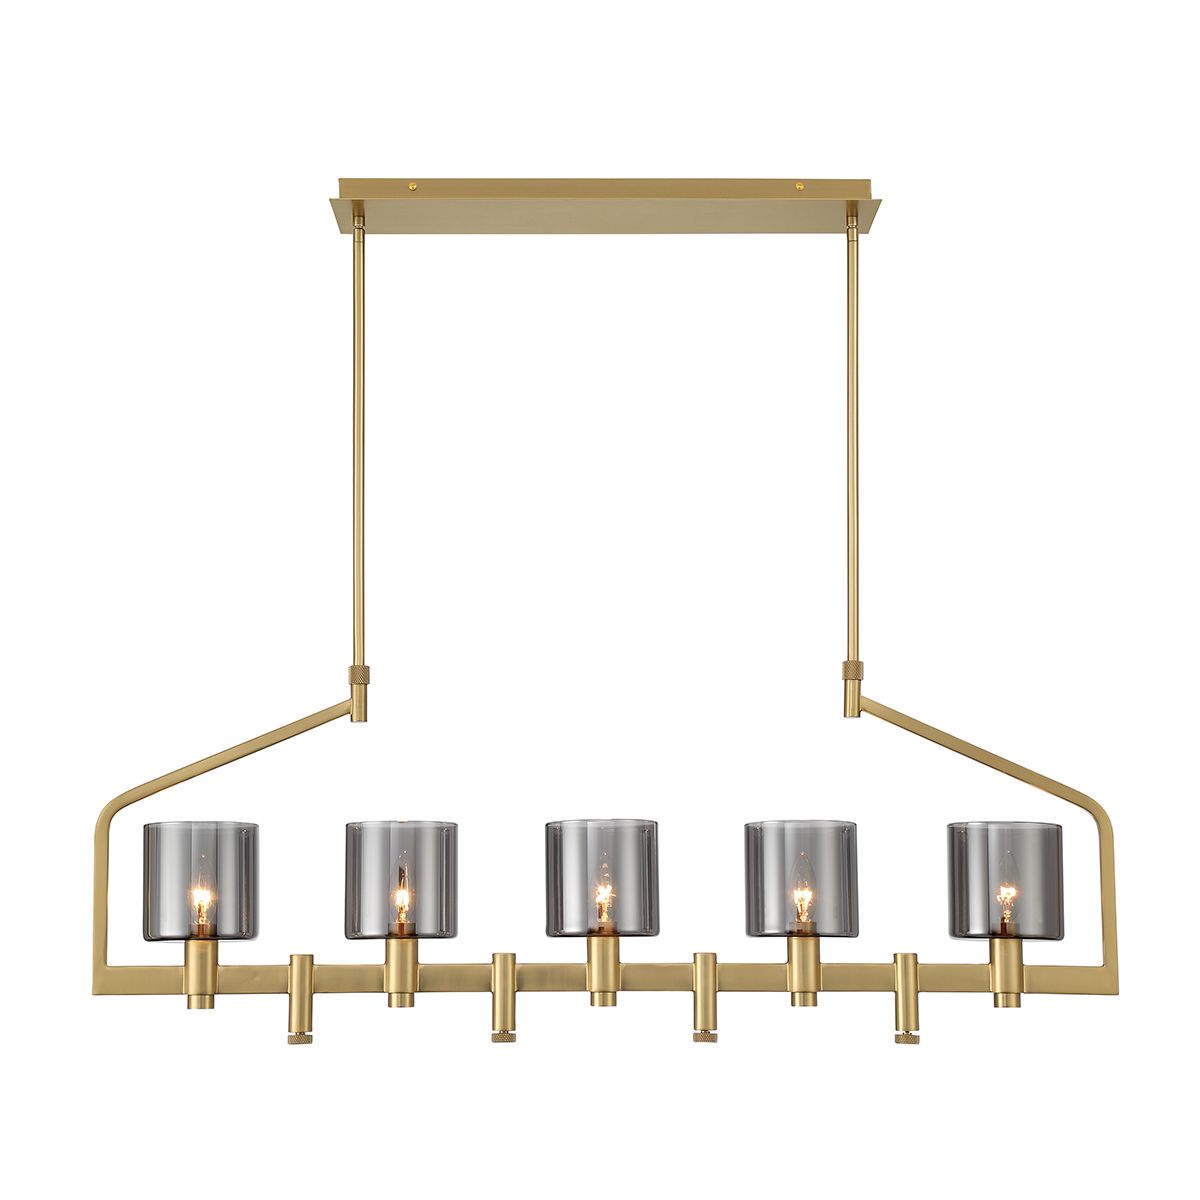 Decato 5 Lights 42 in. Chandelier Gold Finish